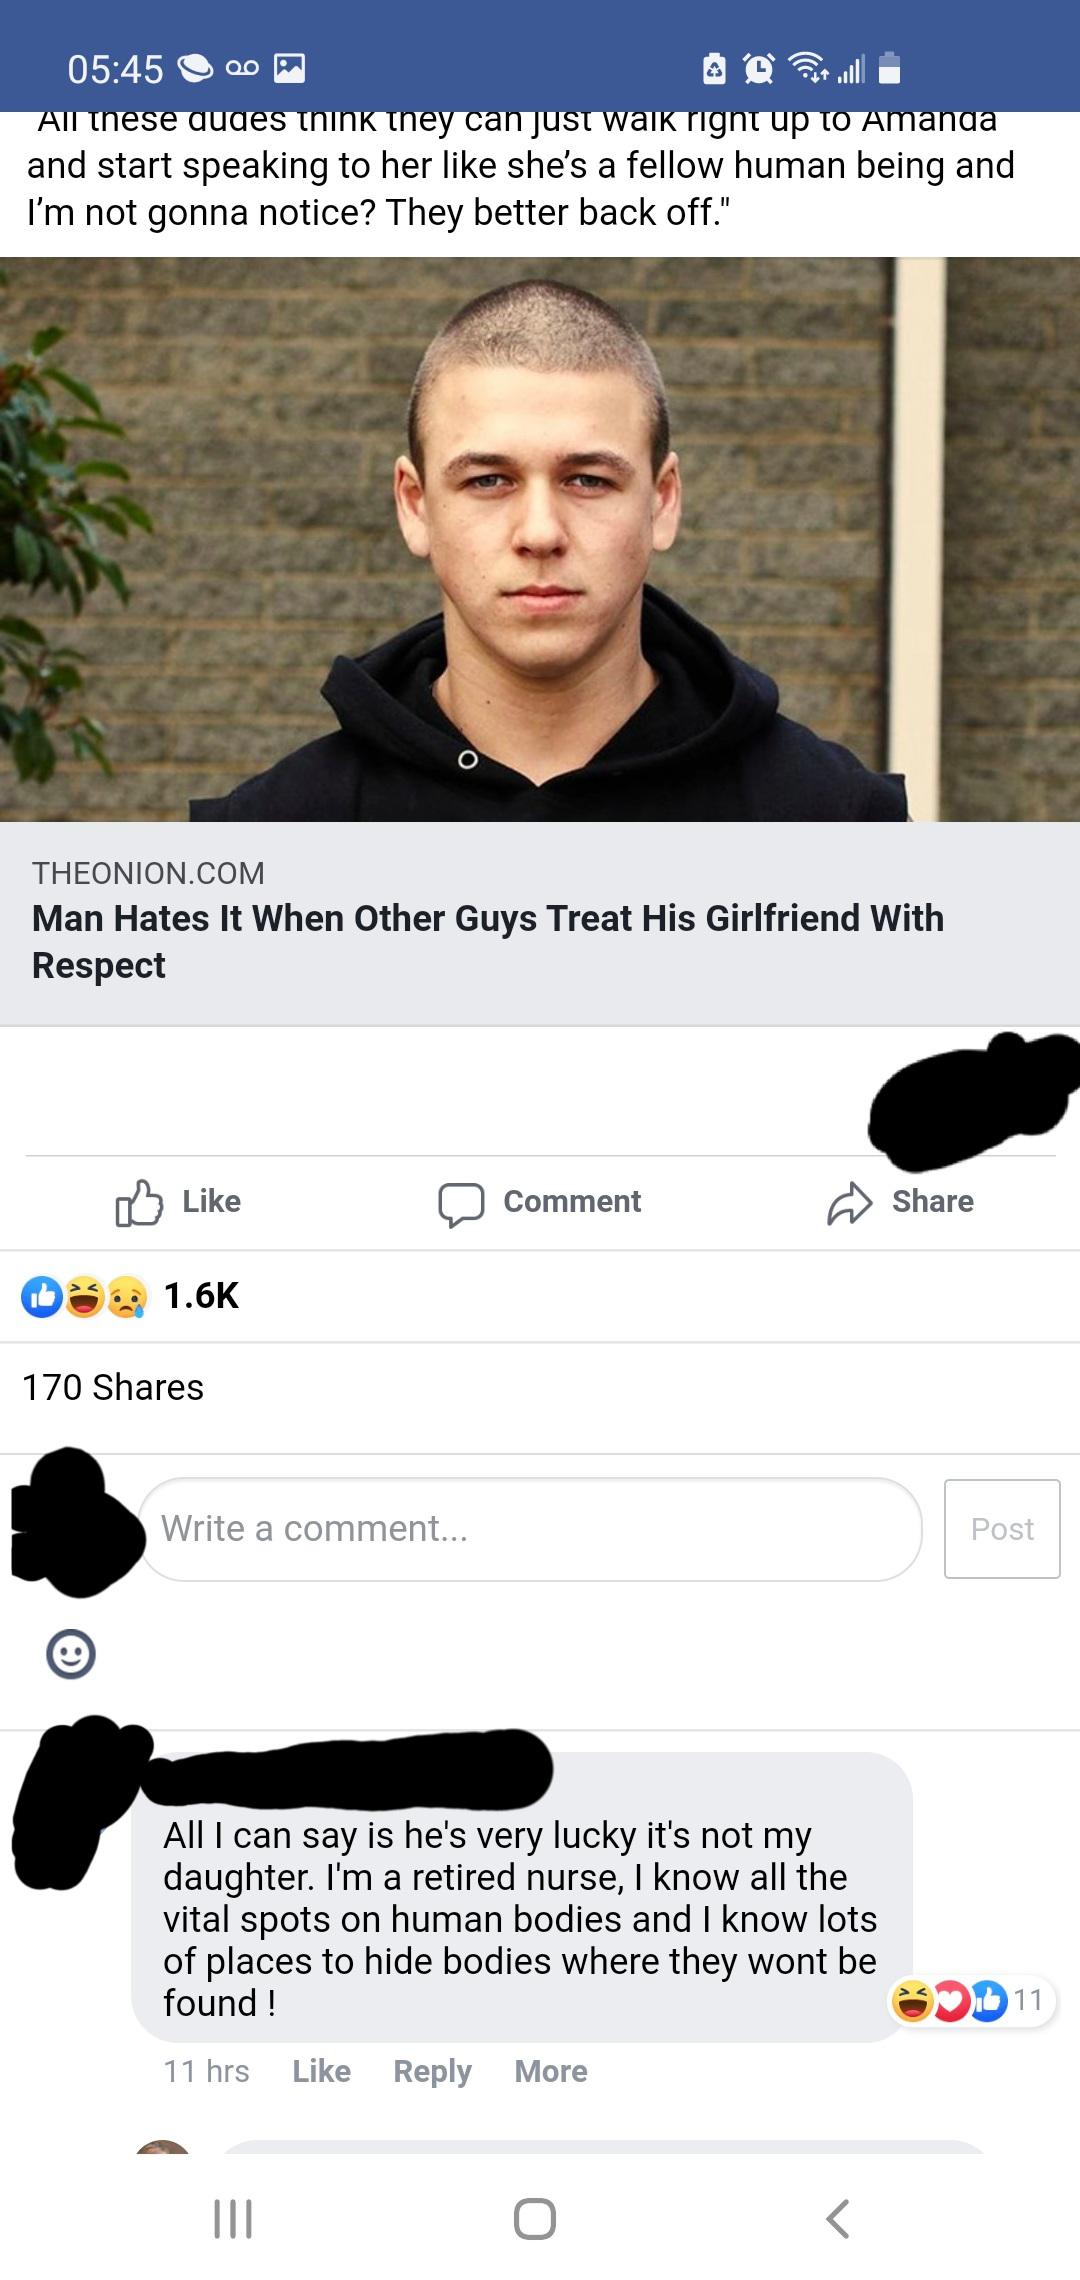 cringe pics - screenshot - ao All these dudes think they Just walk right up to Amanda and start speaking to her she's a fellow human being and I'm not gonna notice? They better back off." Theonion.Com Man Hates It When Other Guys Treat His Girlfriend With